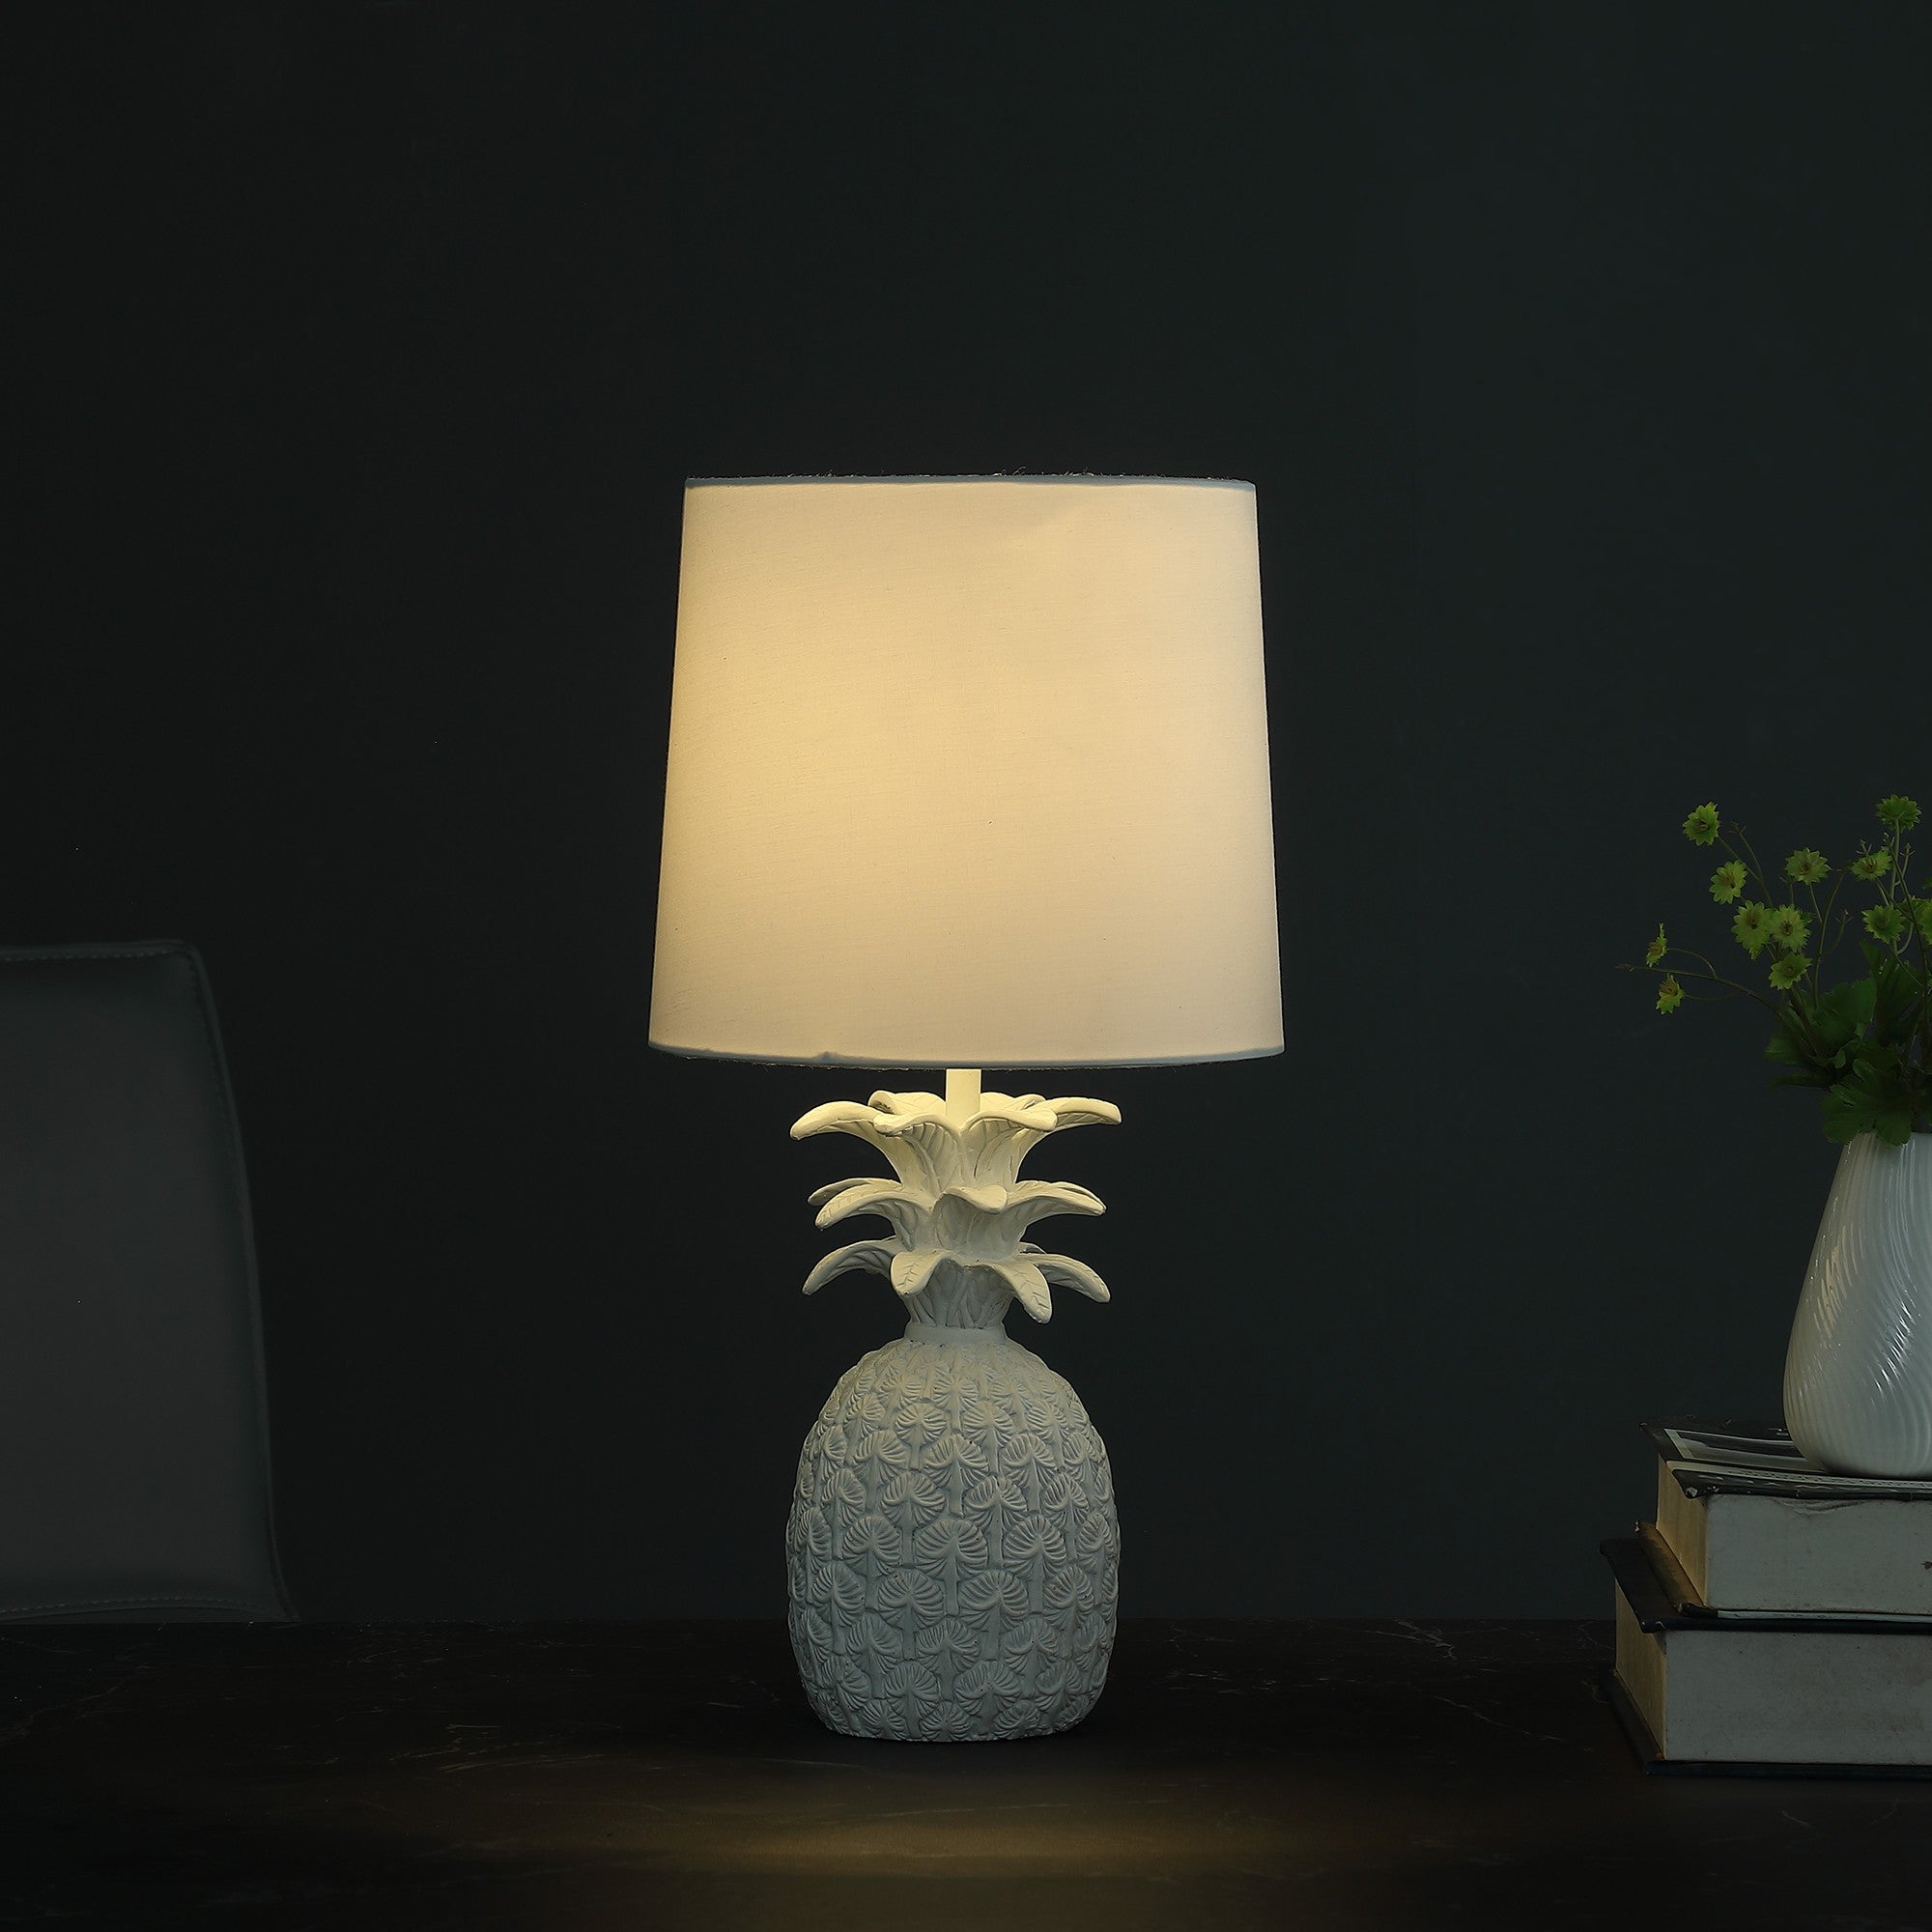 17" White Bedside Table Lamp With White Empire Shade